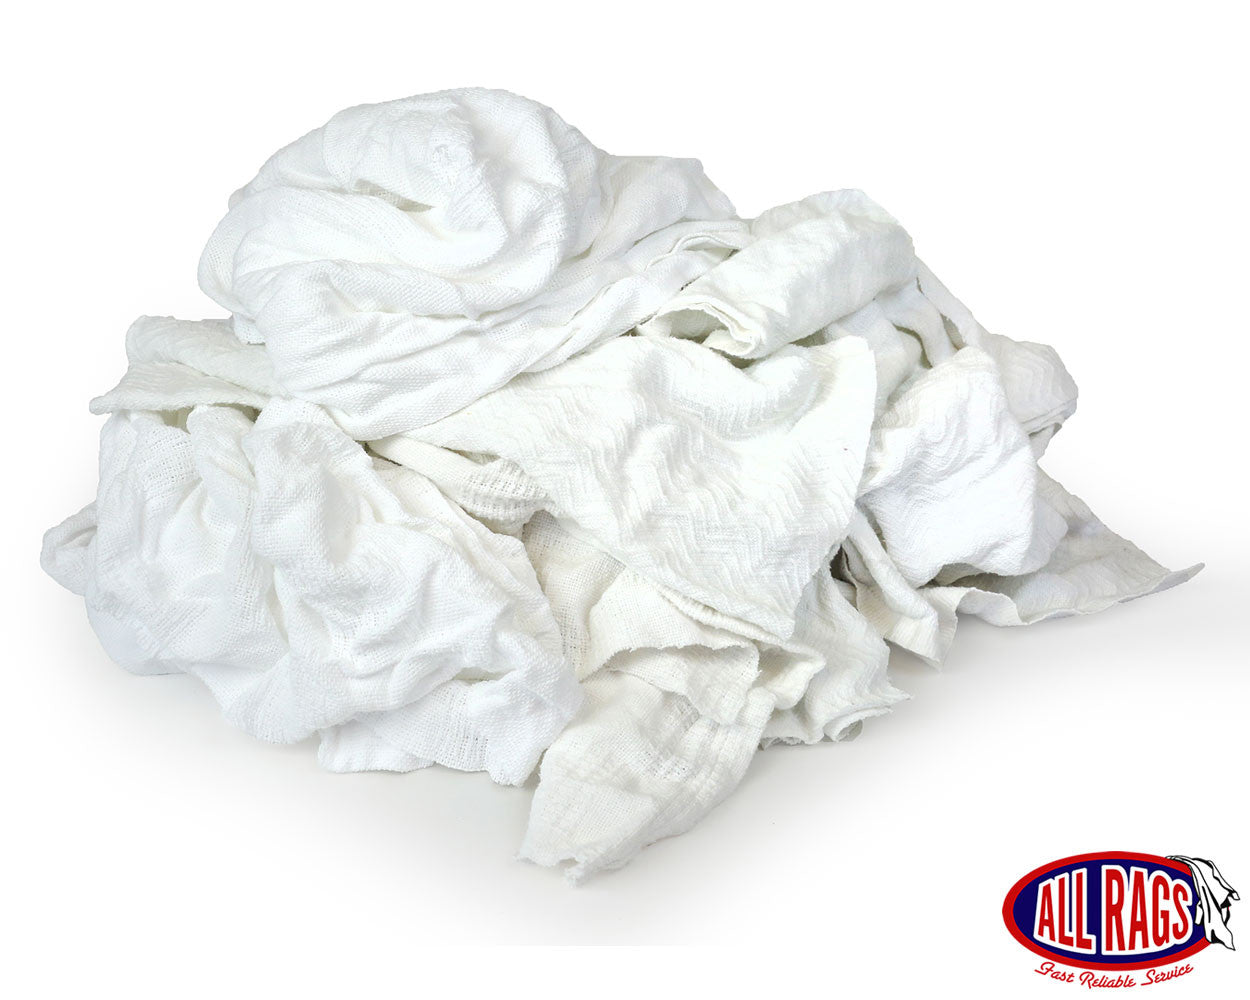 White Knit T-Shirt Cleaning Rags - 1 Pound Bag, Size: 1 lb Bag